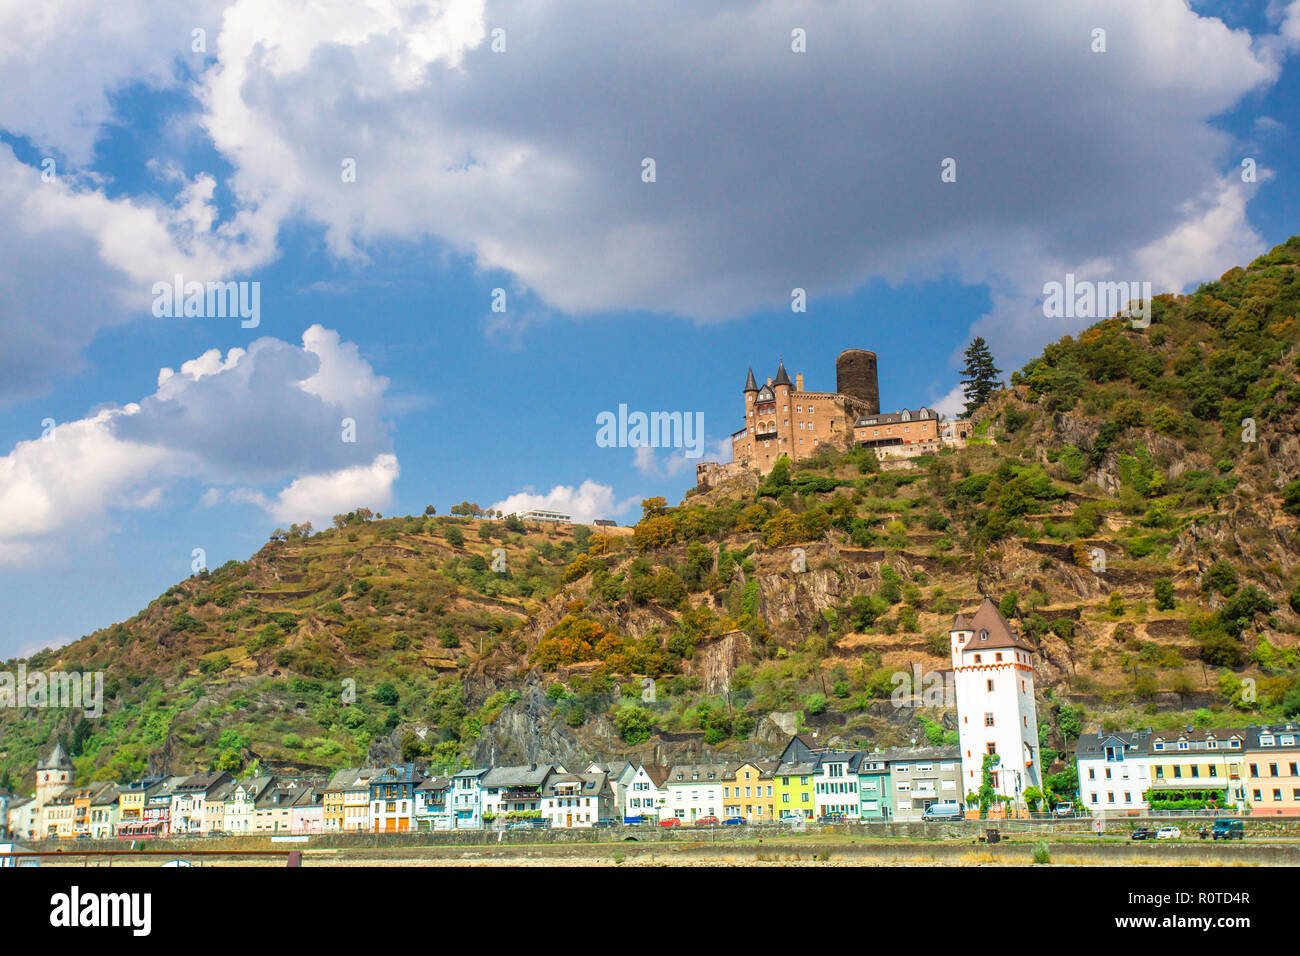 View along the beautiful Rhine River in Germany with the Village of Sankt Goar in view Stock Photo